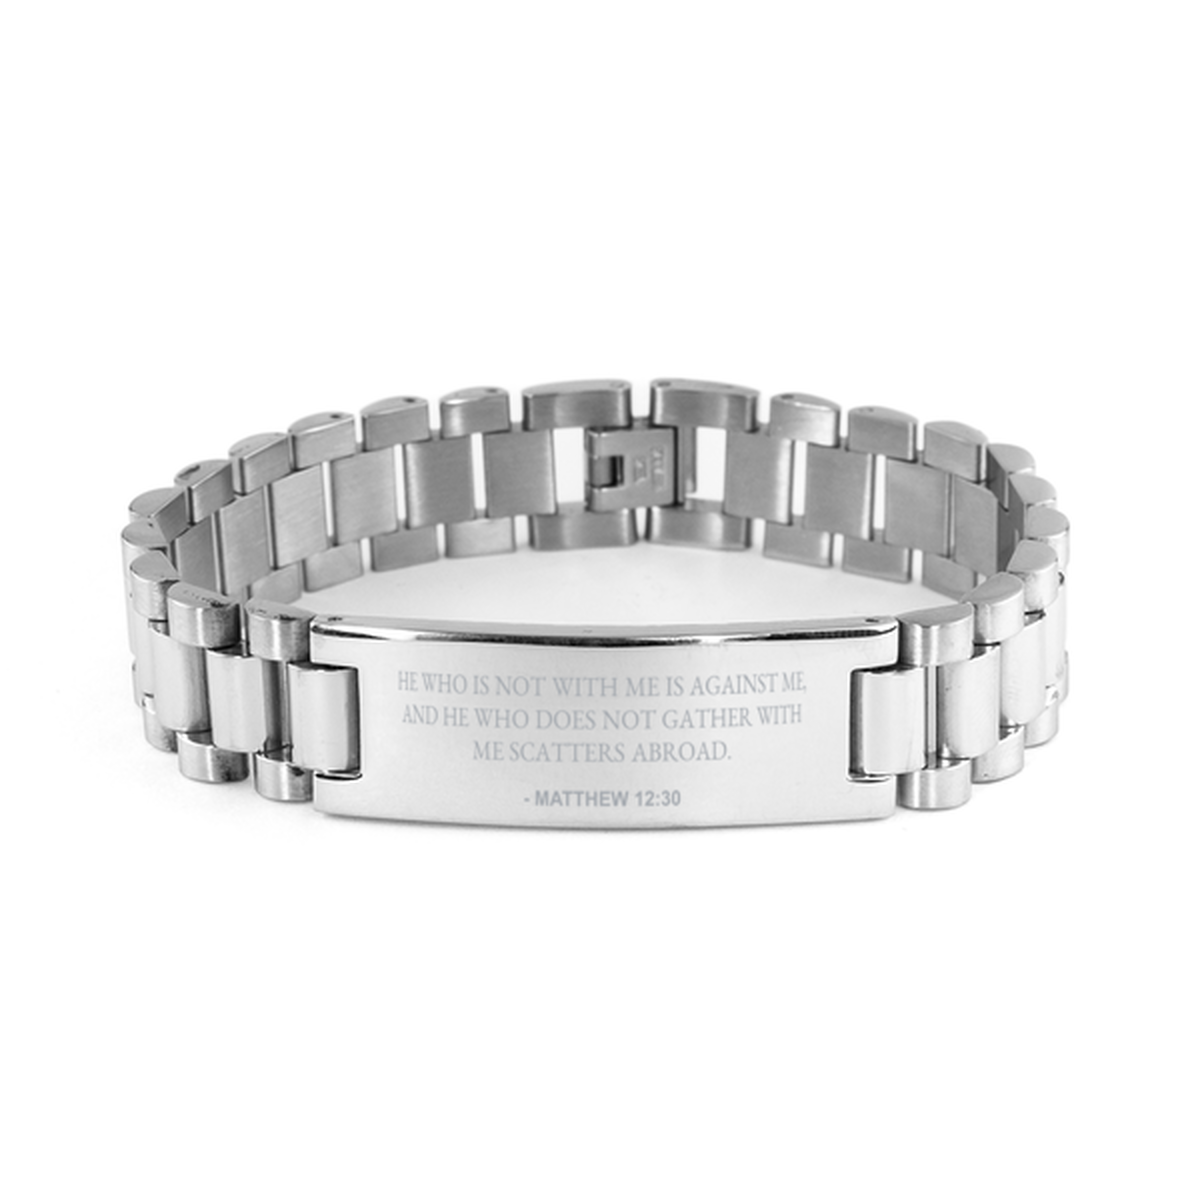 Christian Ladder Stainless Steel Bracelet, Matthew 12:30 He Who Is Not With Me Is Against Me, And He Who, Motivational Bible Verse Gifts For Men Women